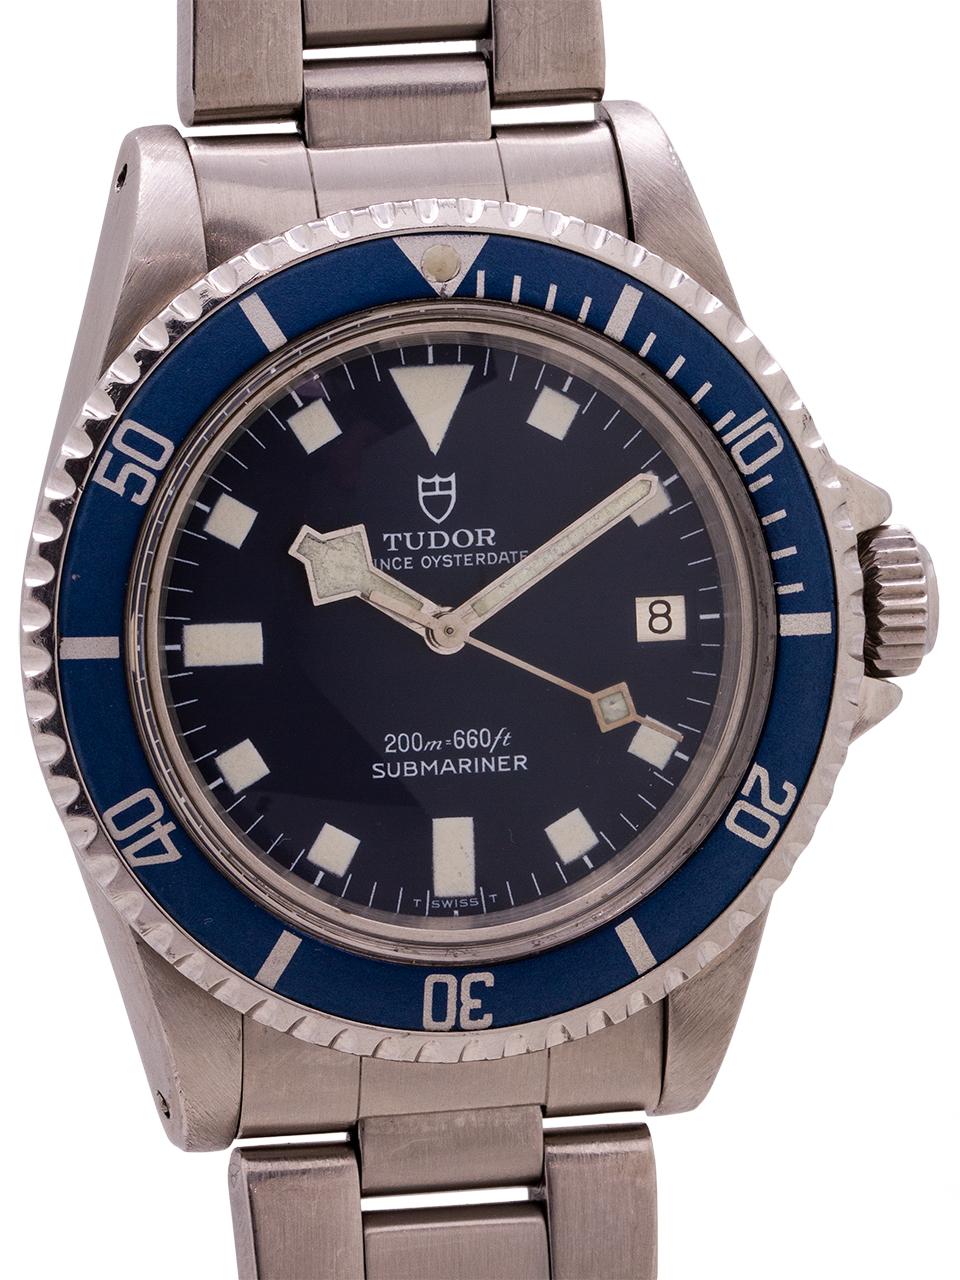 
Tudor blue dial “Snowflake” Submariner with date ref# 94110, serial number 953,xxx , circa 1981. Extremely nice condition example with beautiful original dark blue dial with fully intact original square luminous indexes and original “snowflake”